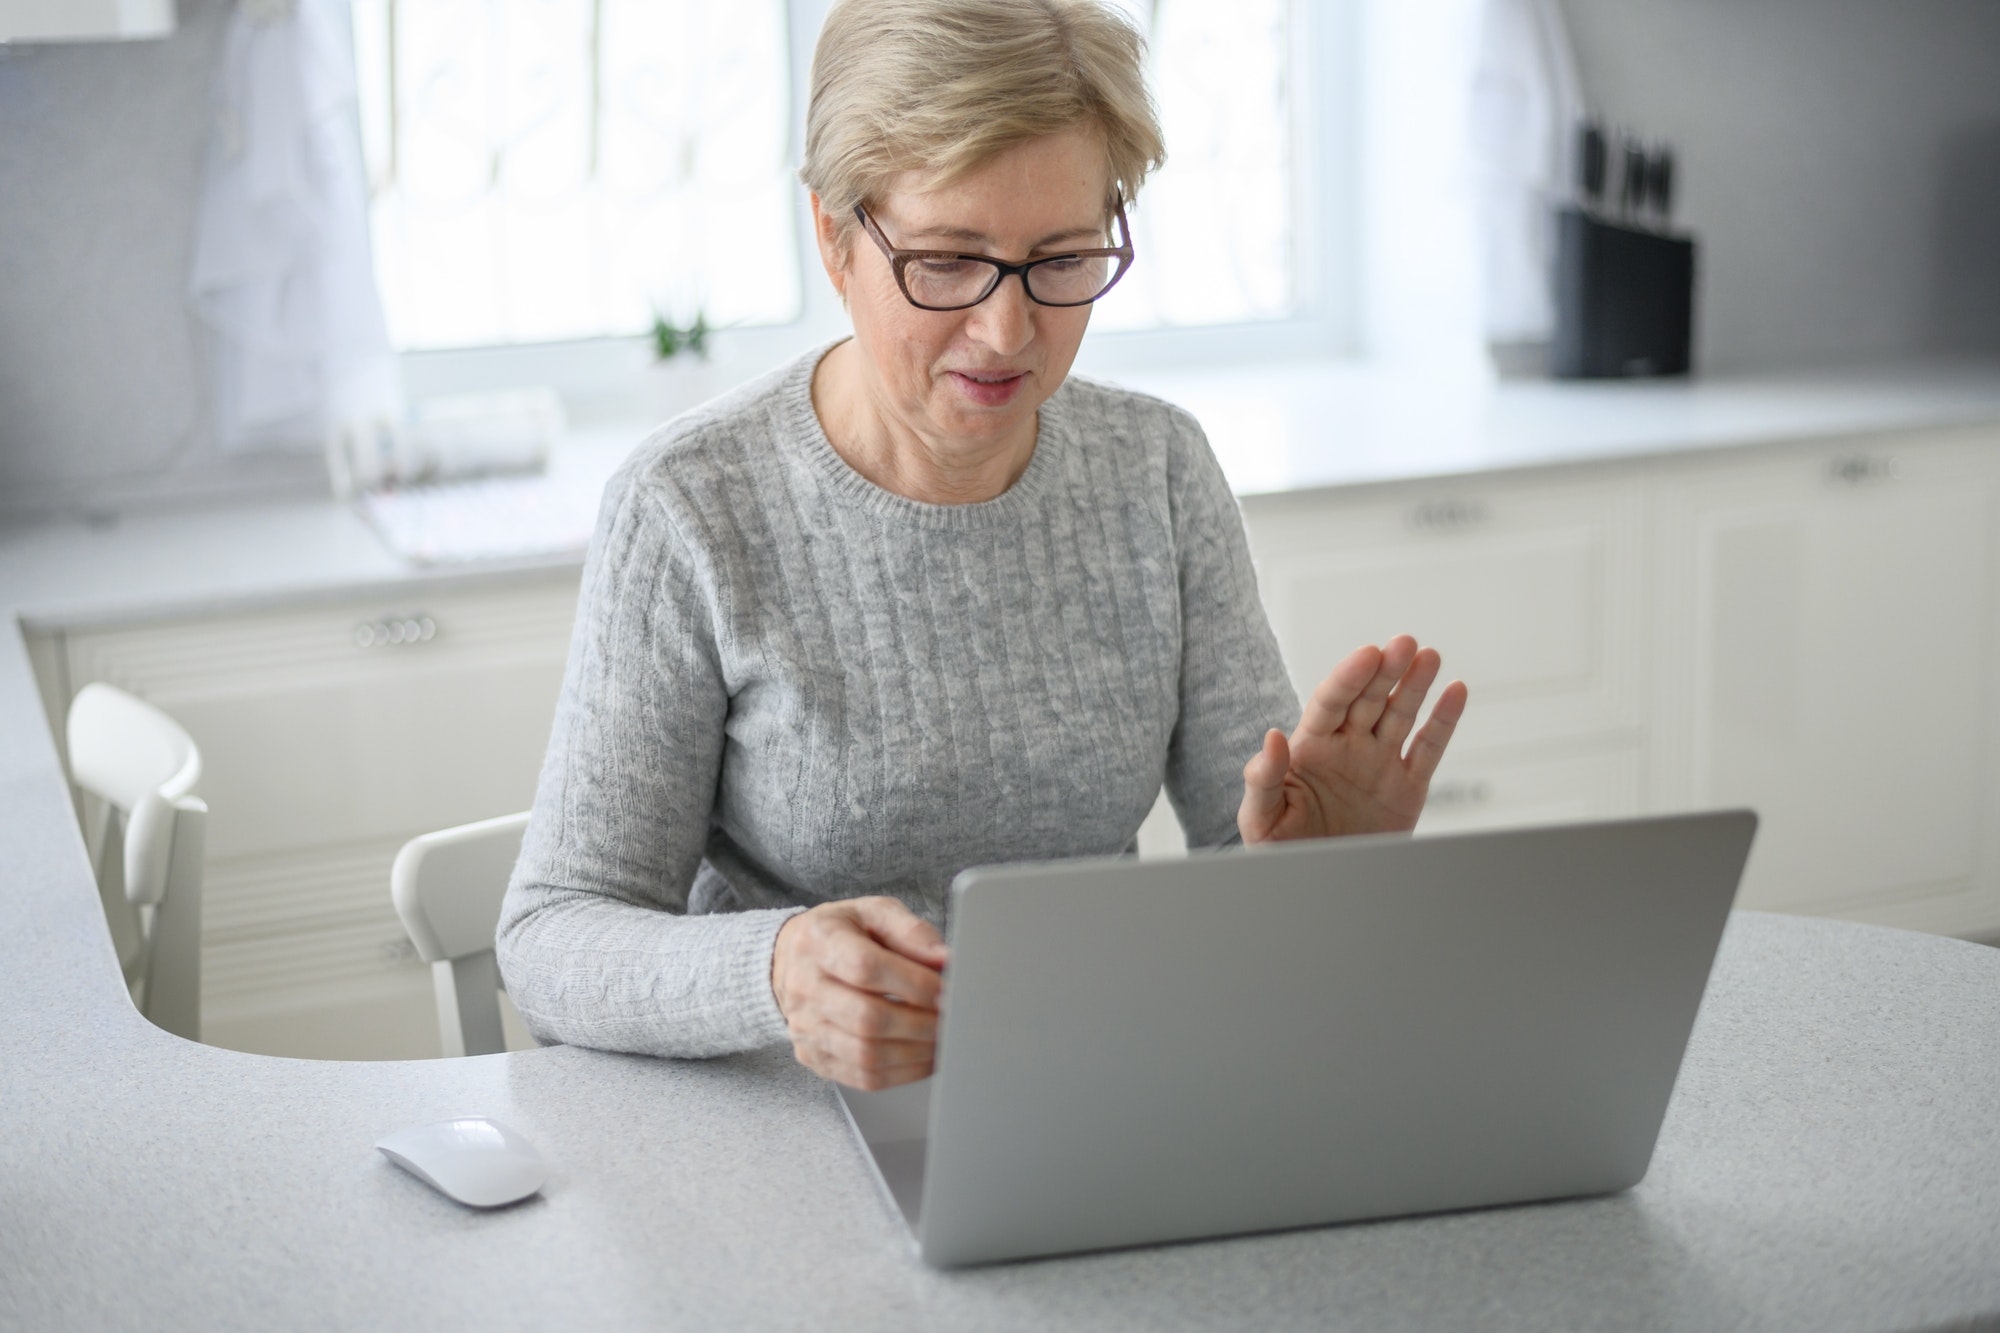 senior citizen uses modern technology in everyday life, online payment